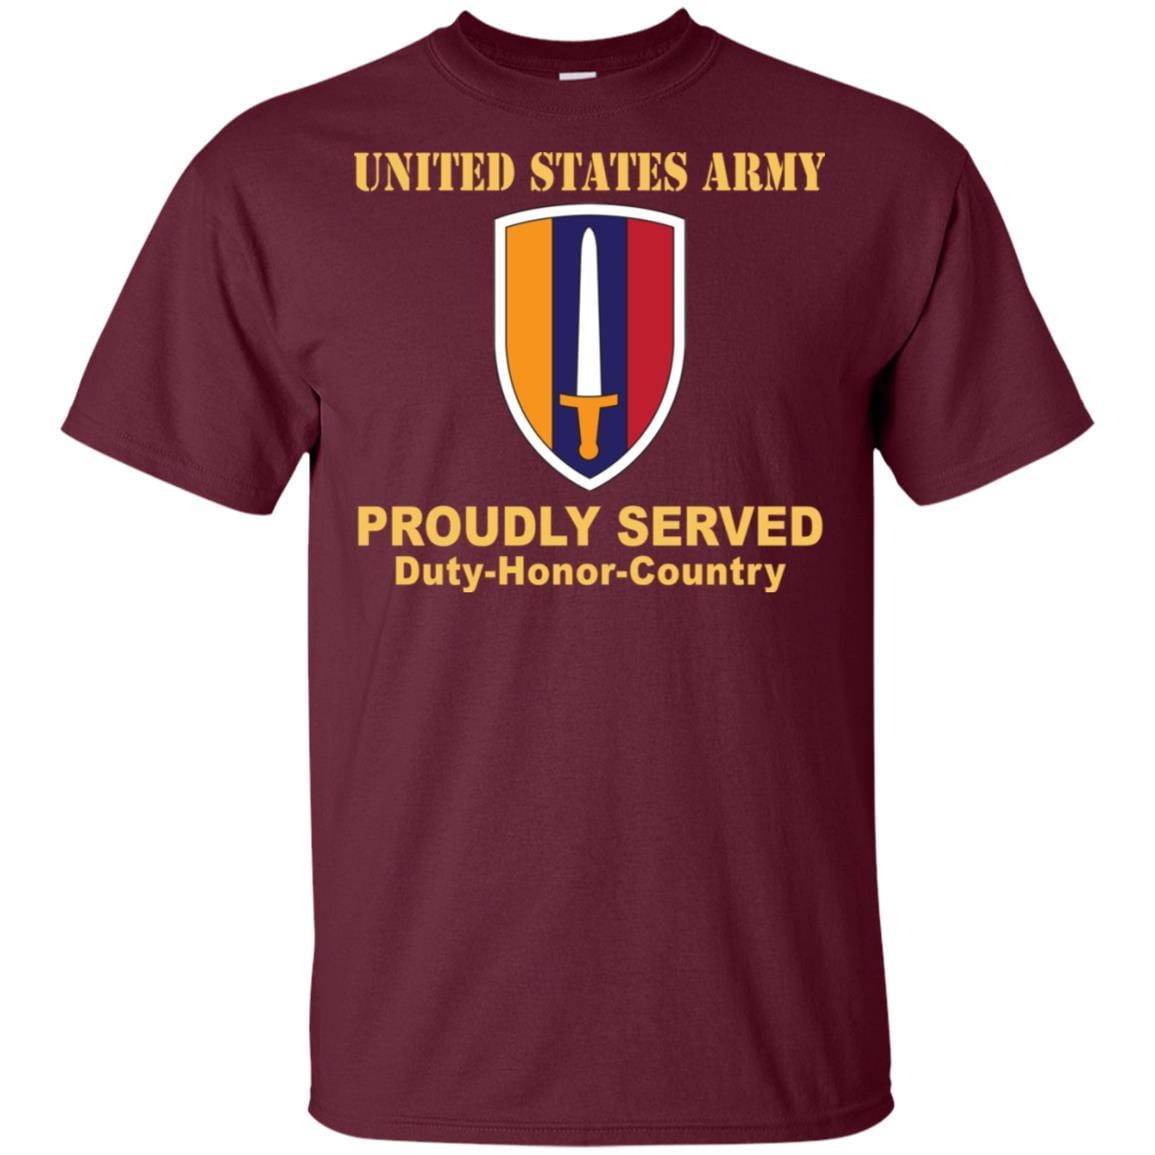 U.S. ARMY VIETNAM- Proudly Served T-Shirt On Front For Men-TShirt-Army-Veterans Nation